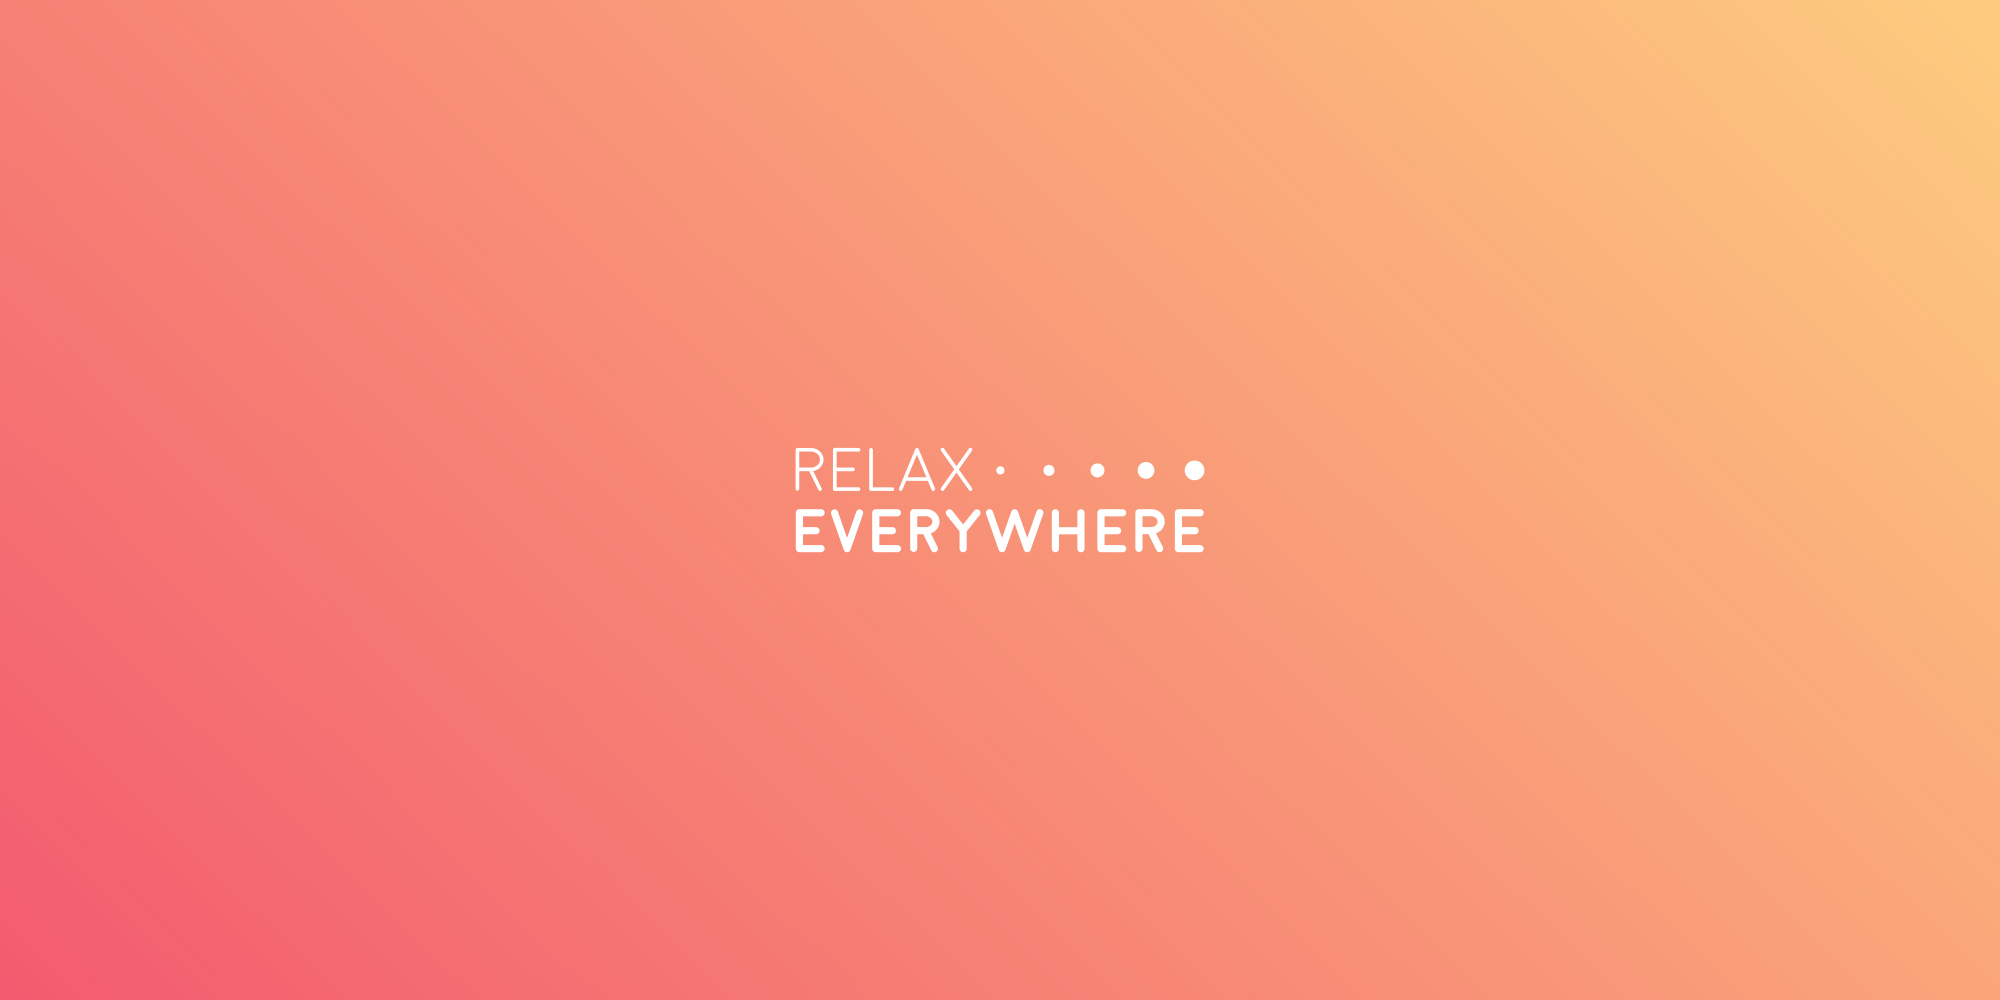 Relax Everywhere, le logotype